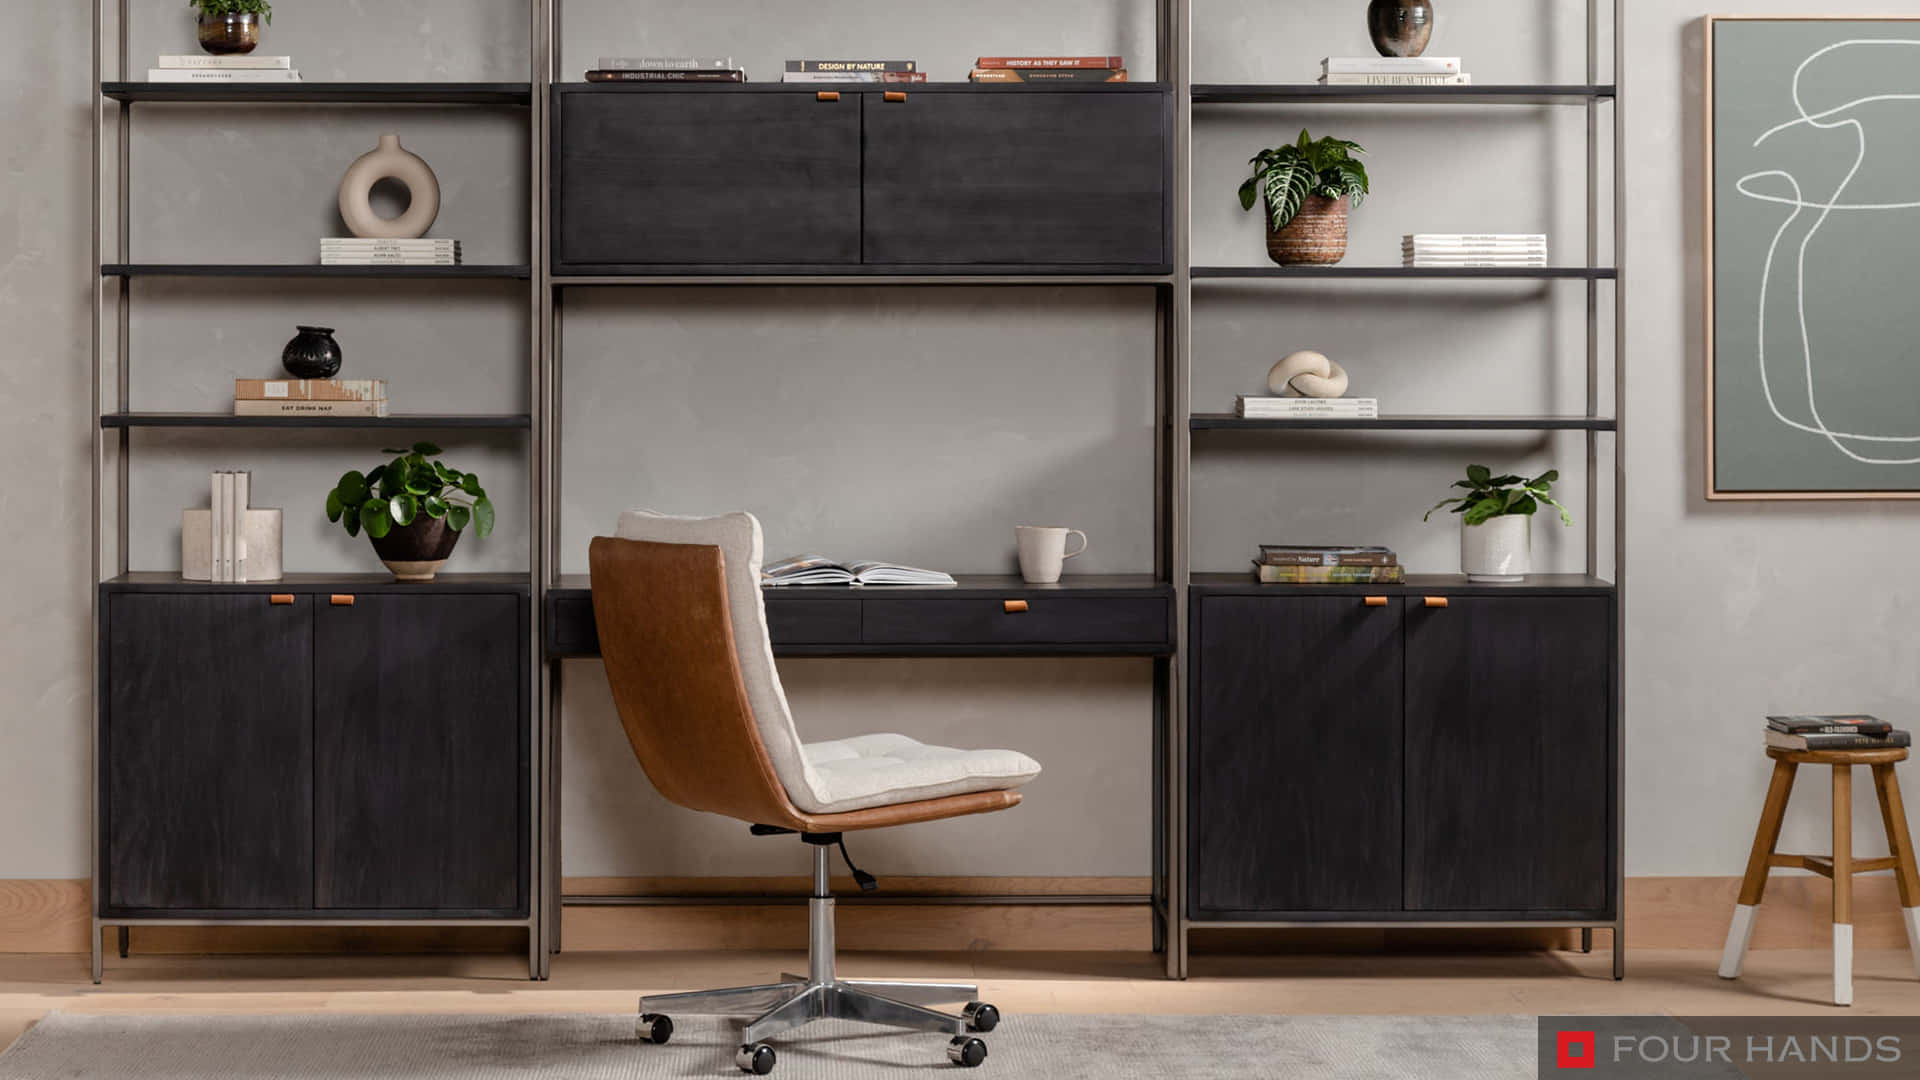 A Desk With A Chair And Shelves